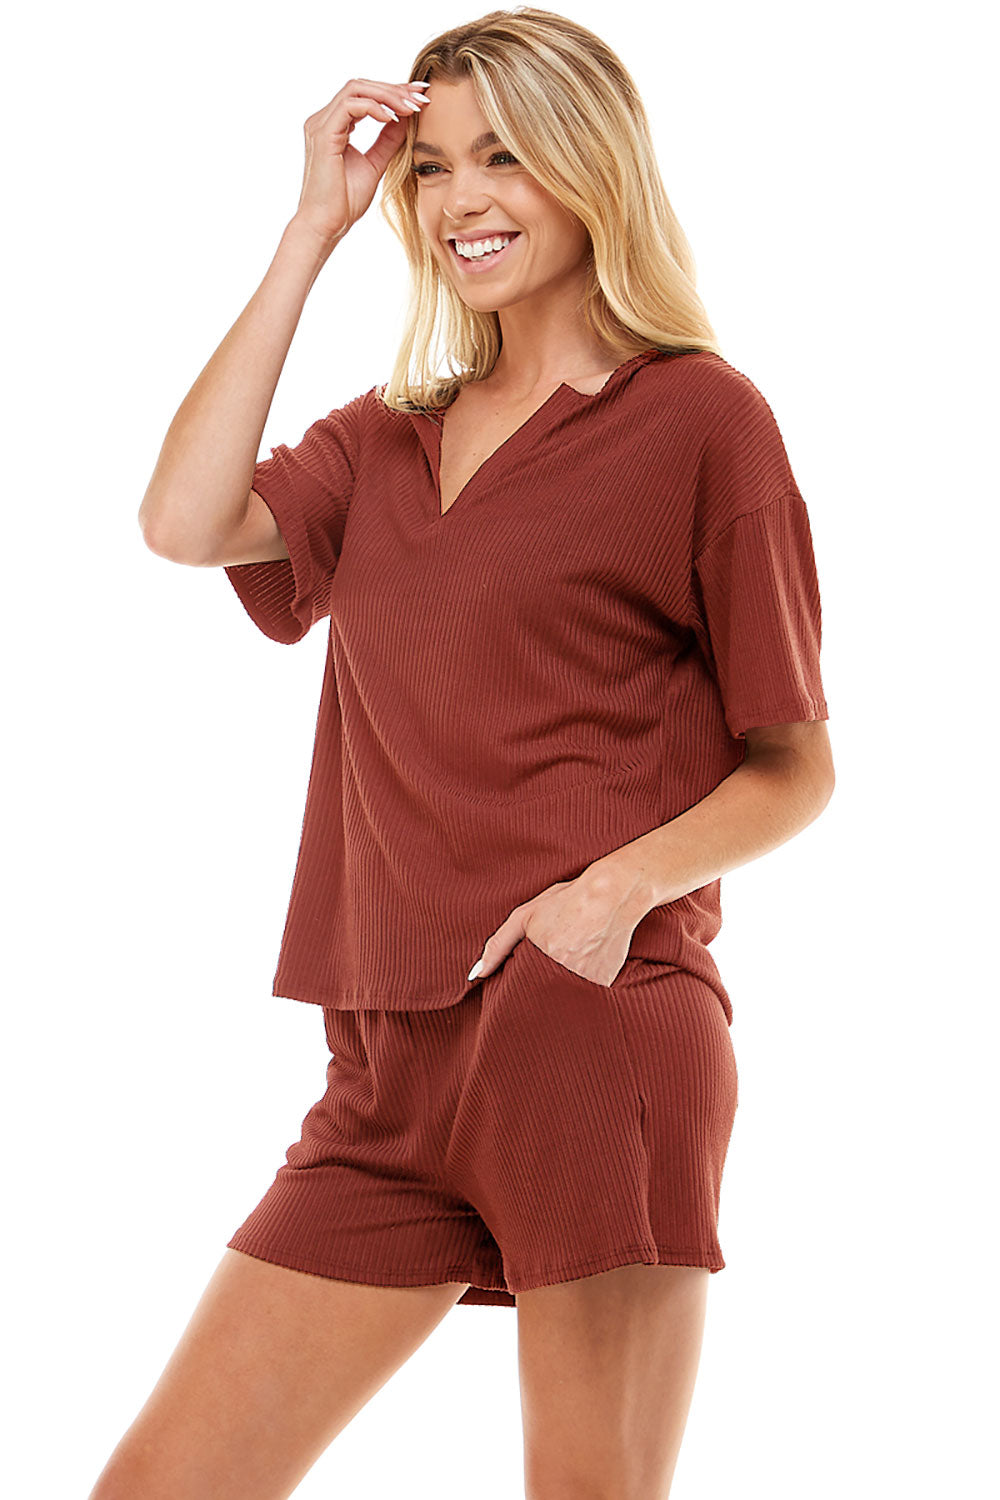 Women's Ribbed Knit Pajama Sets Short Sleeve Top and Shorts 2 Pieces Loungewear Sweatsuit Outfits with Pockets